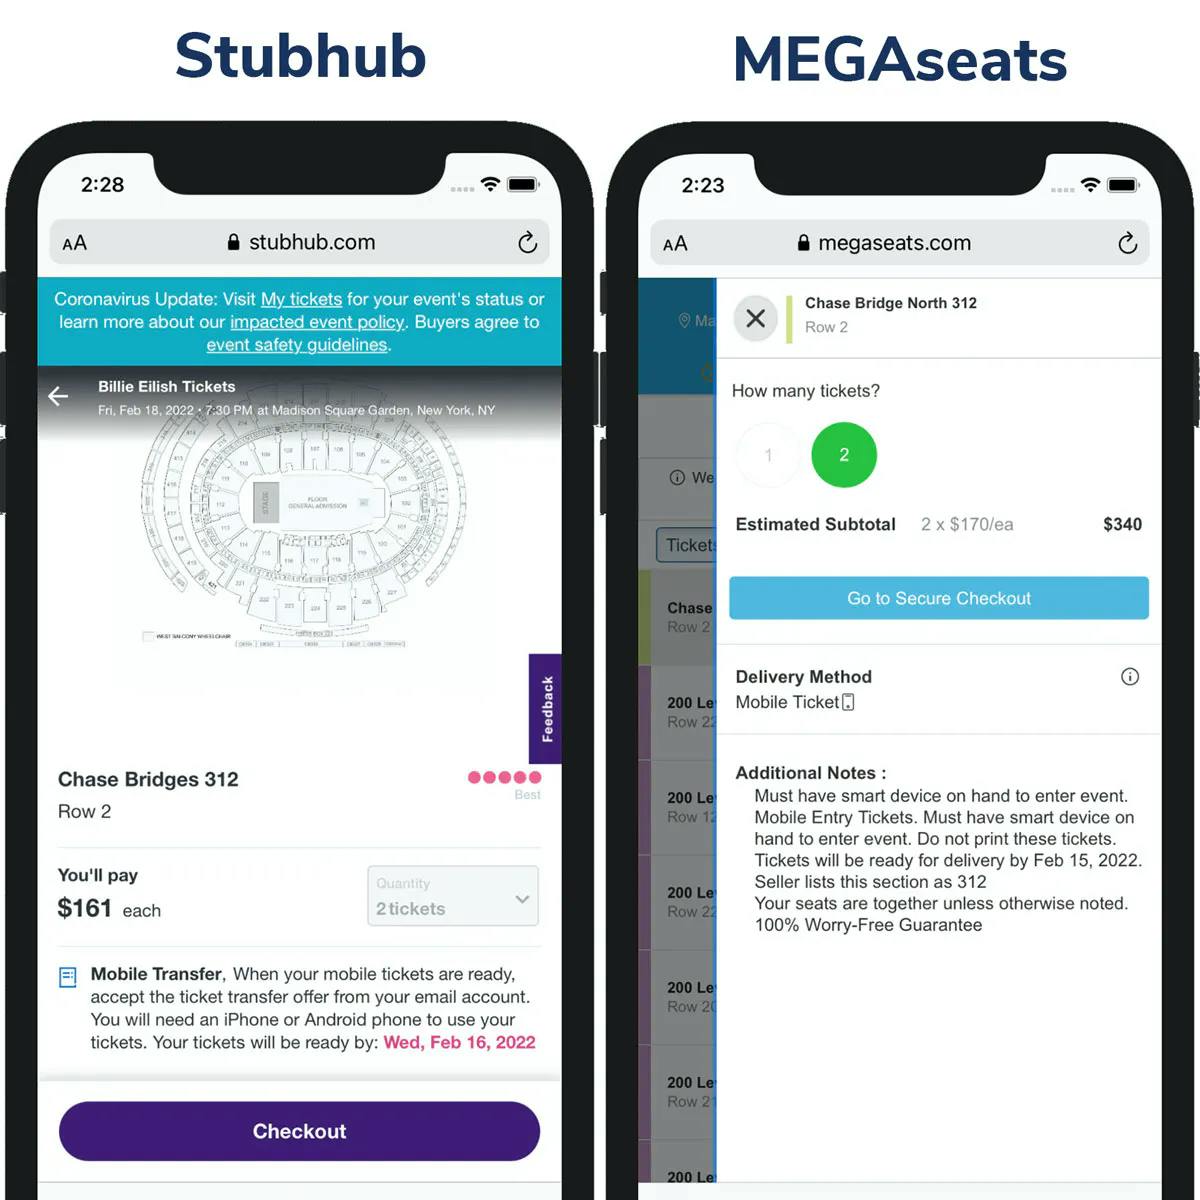 Screenshot of TicketMaster price vs MegaSeats Price on Maps Page